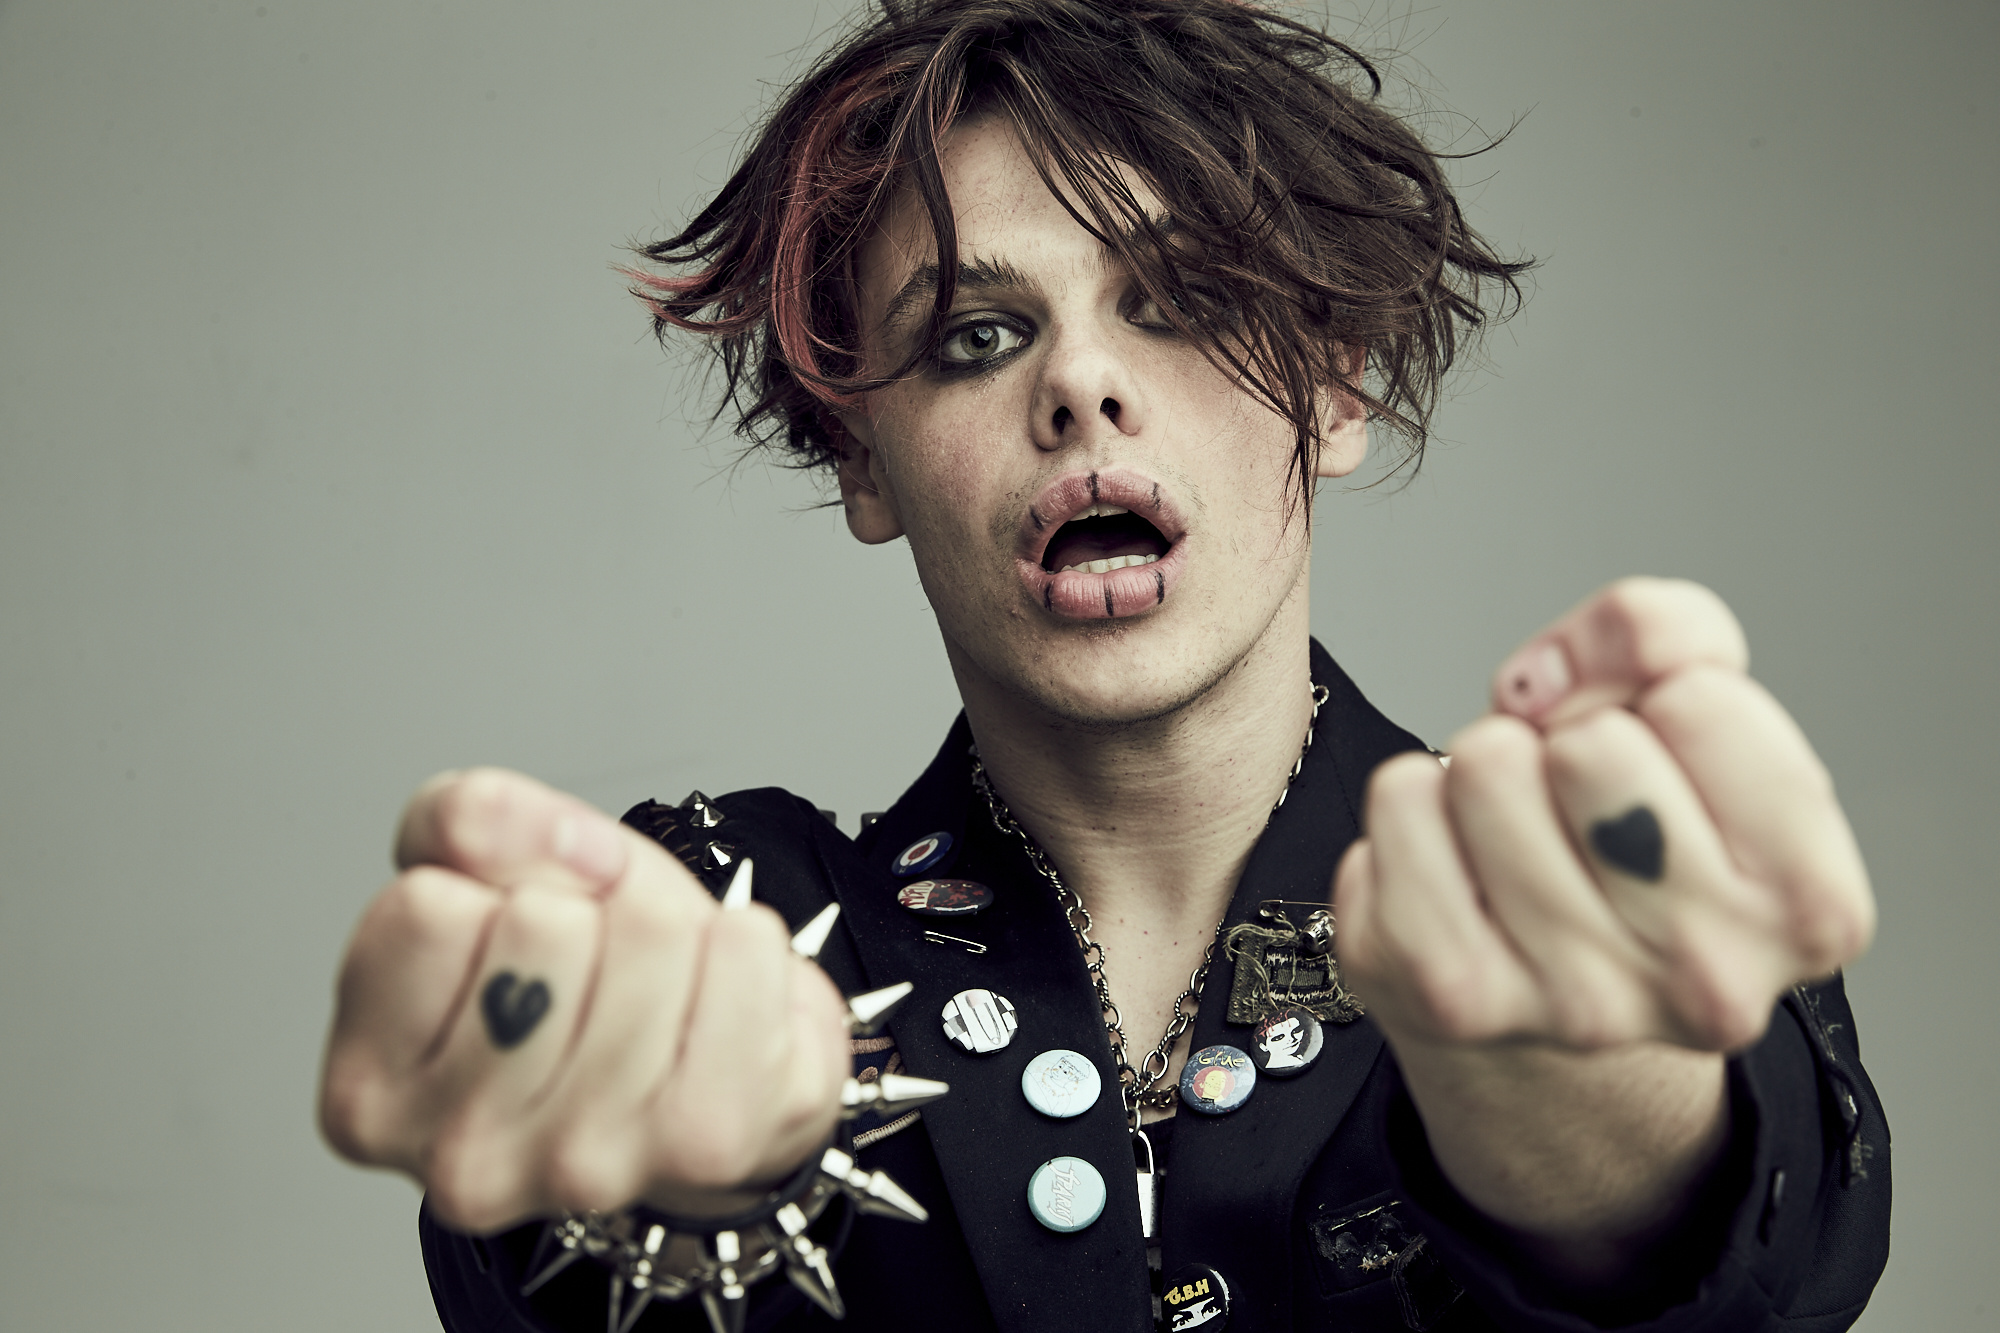 Yungblud Music, Collaborative songs, Genre-bending sound, Exciting collaborations, 2000x1340 HD Desktop